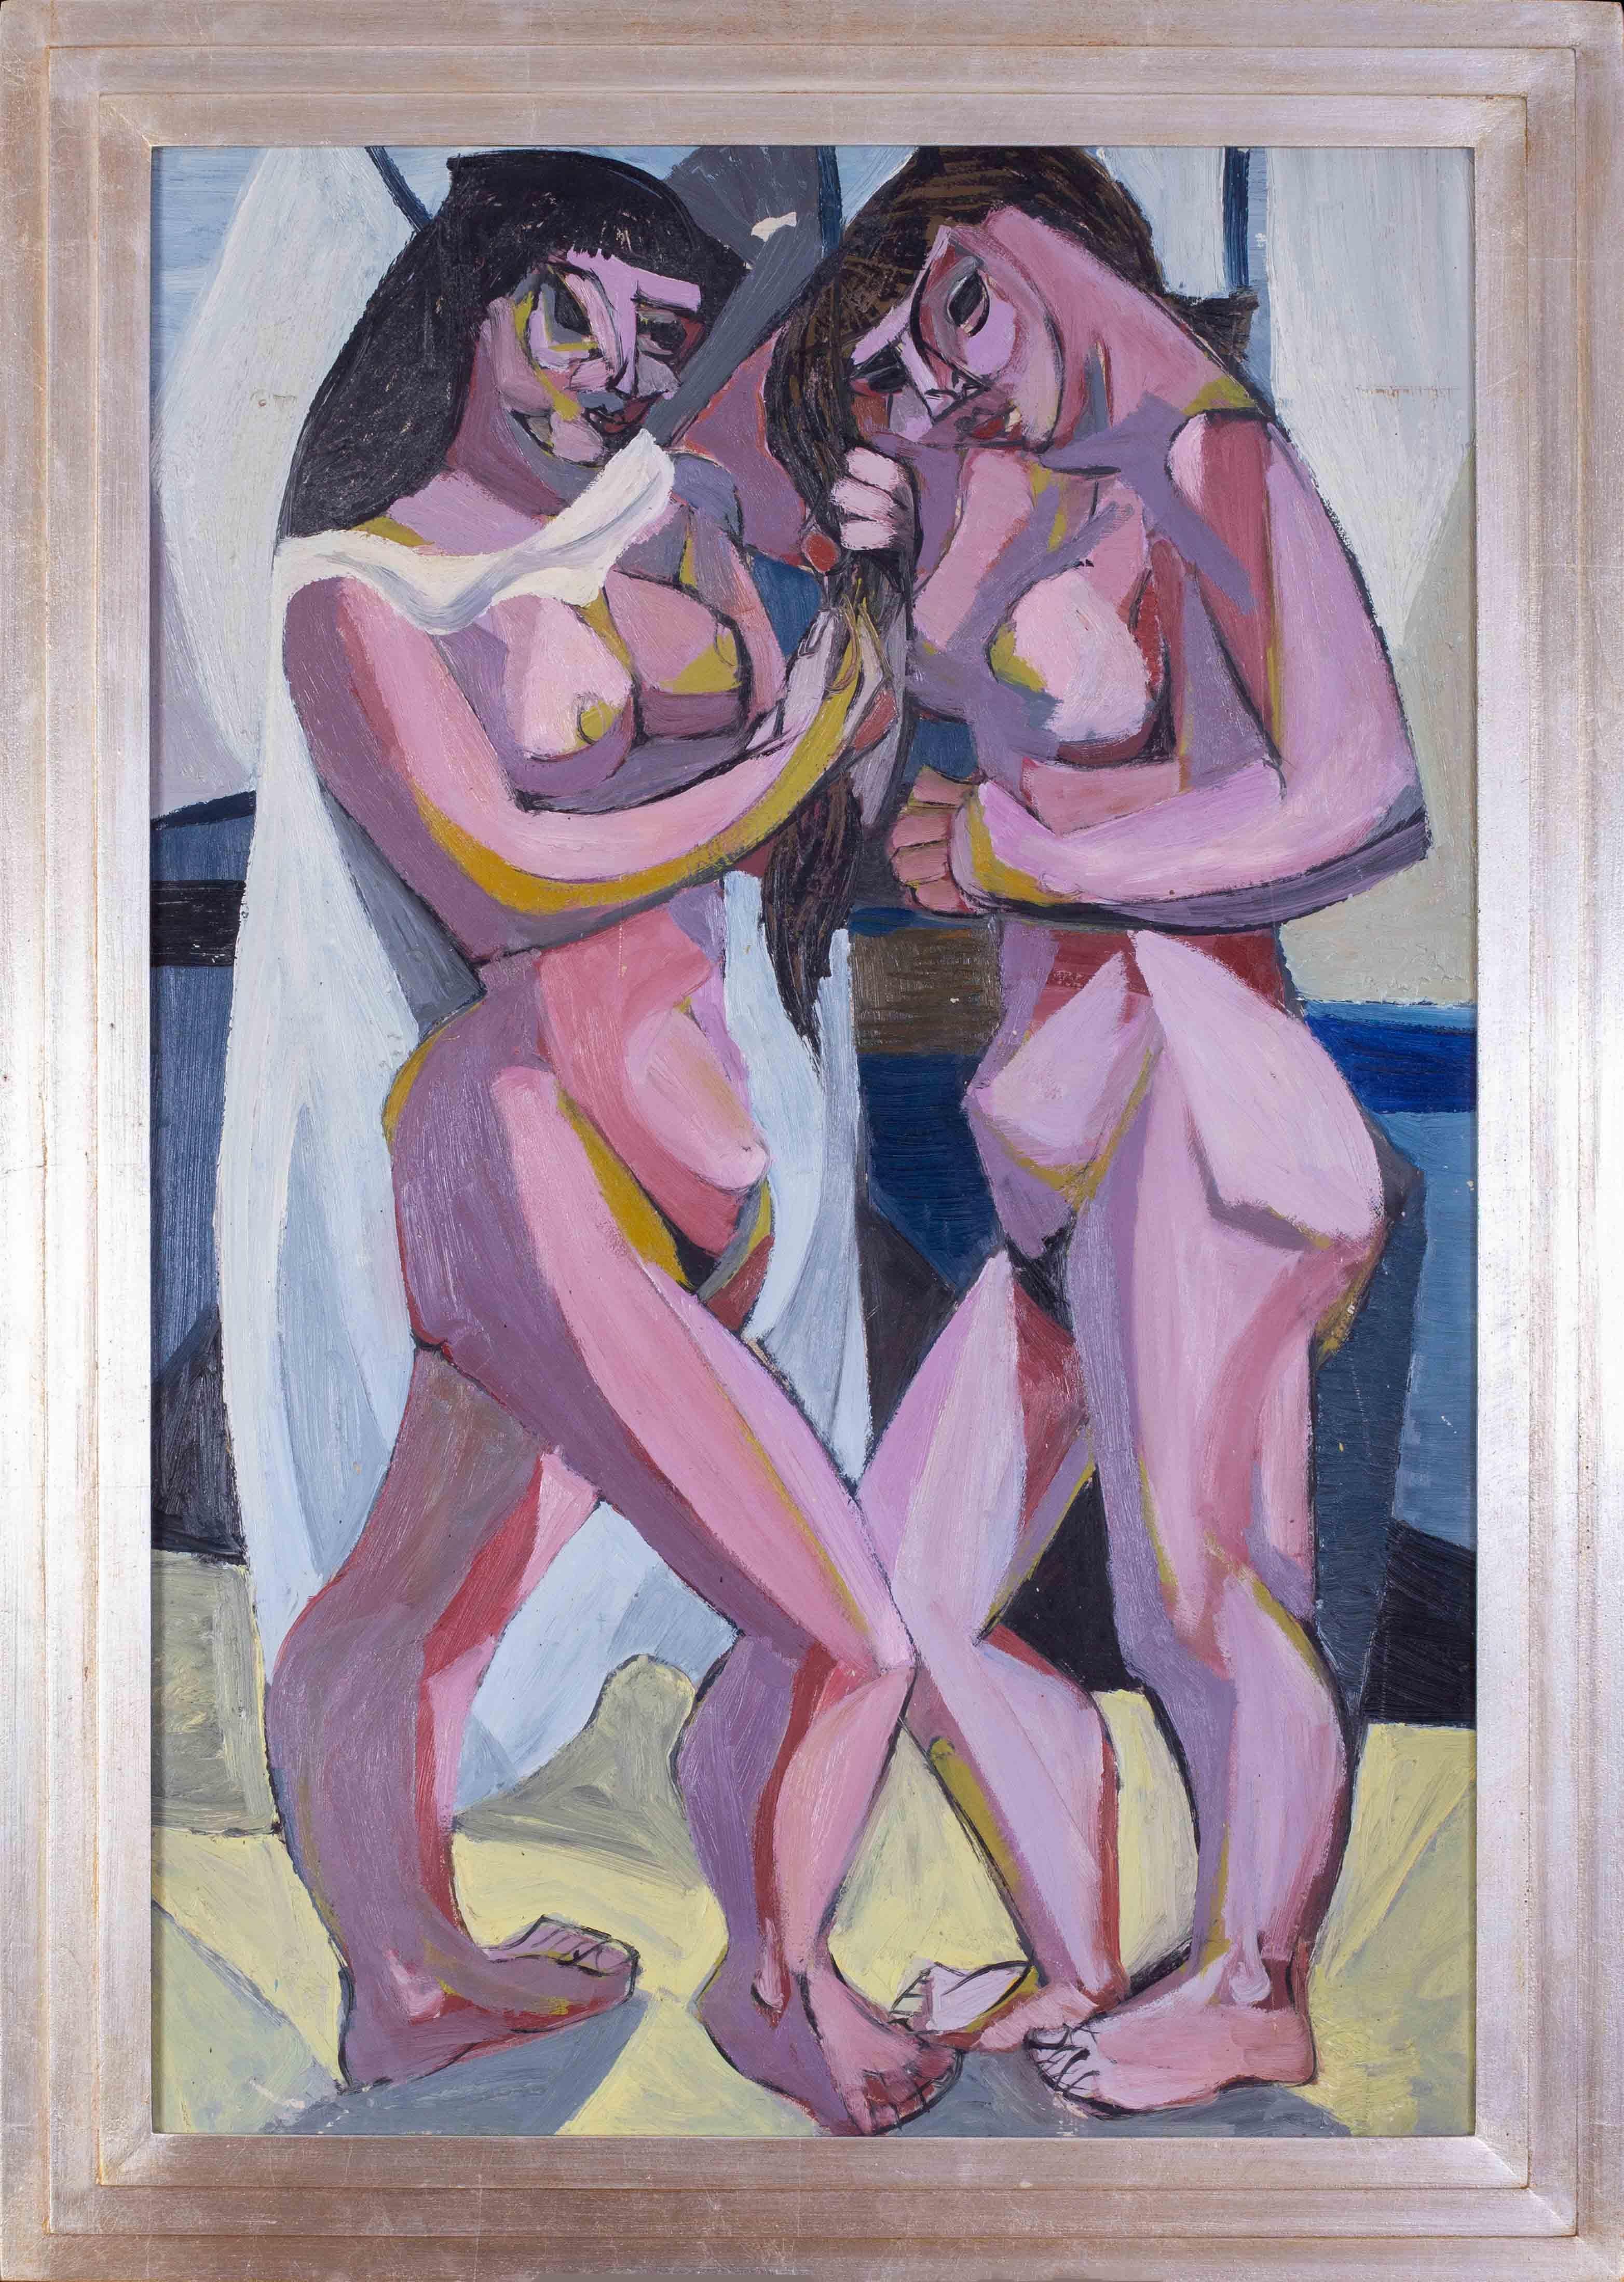 A large, Cubist 20th Century oil painting of two nudes